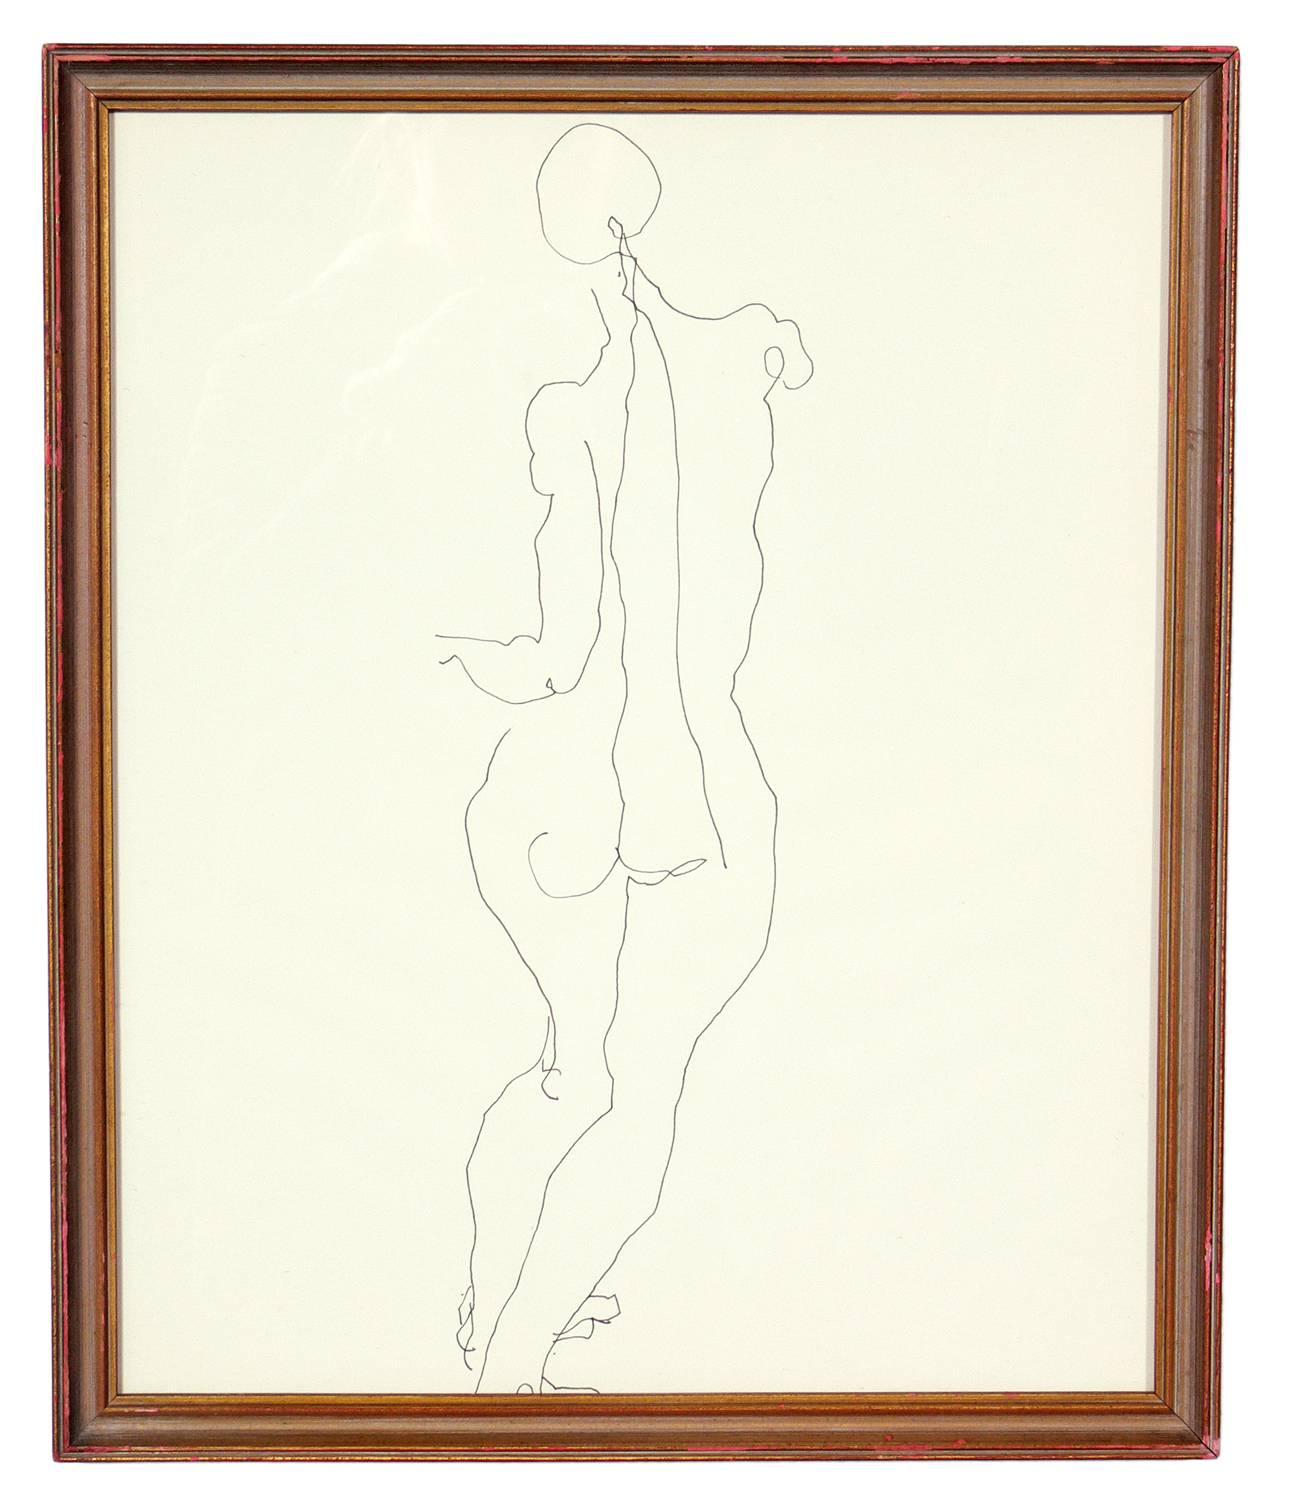 Selection of Figural Line Drawings or Gallery Wall by Miriam Kubach 2